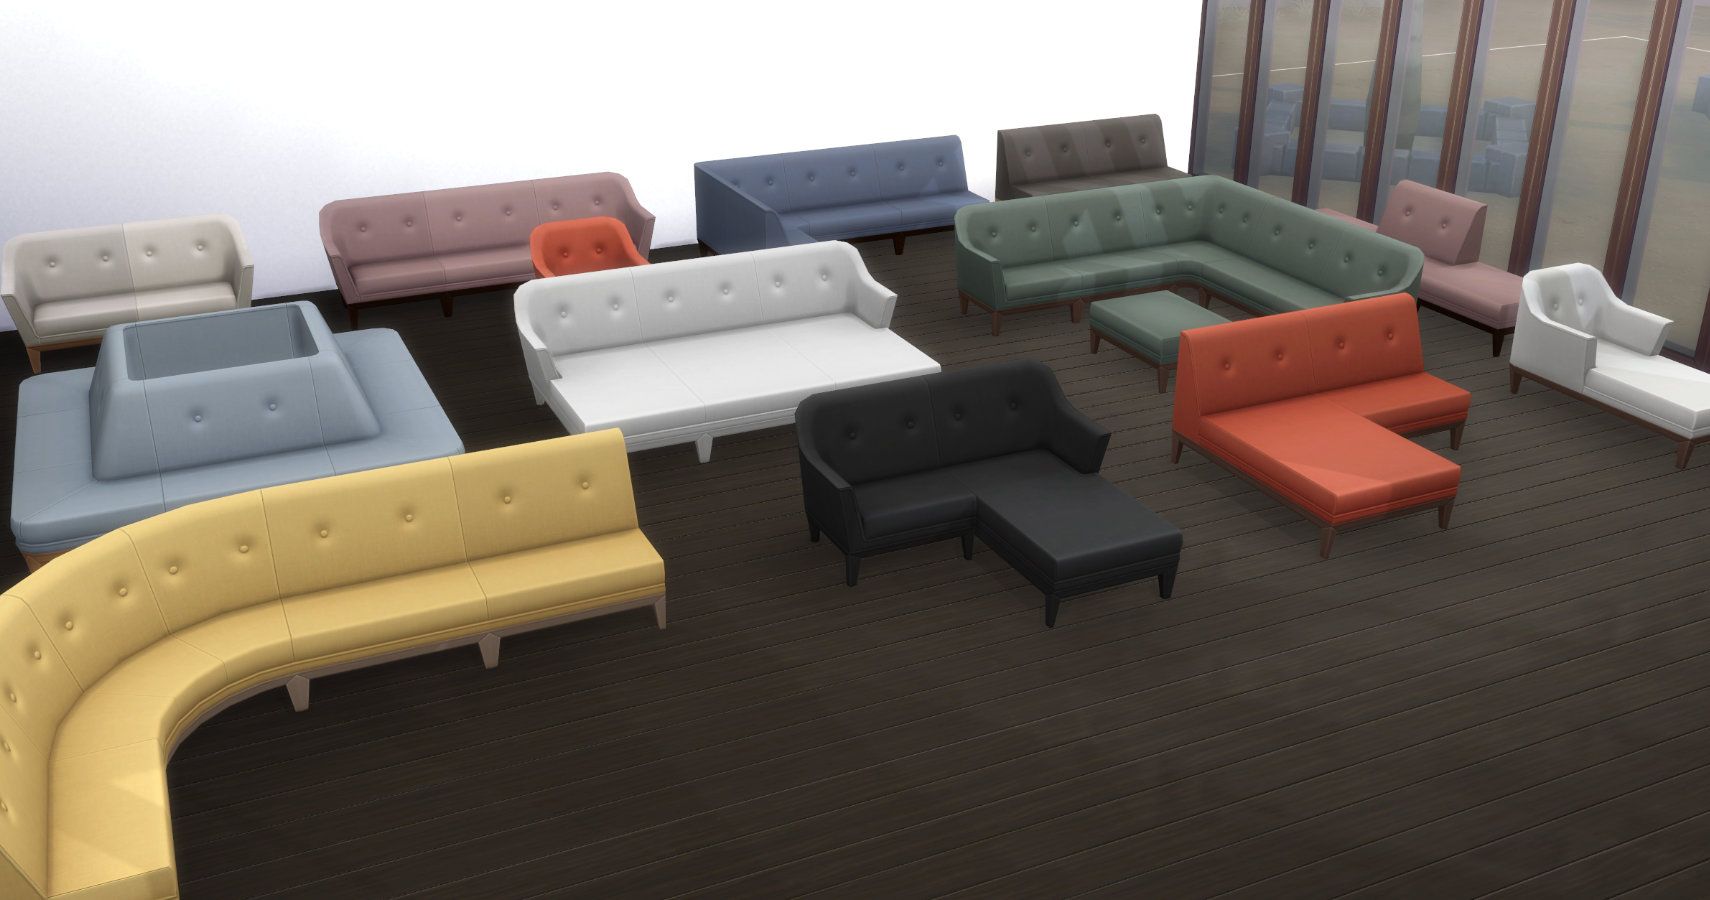 different sofa variations of the modern design